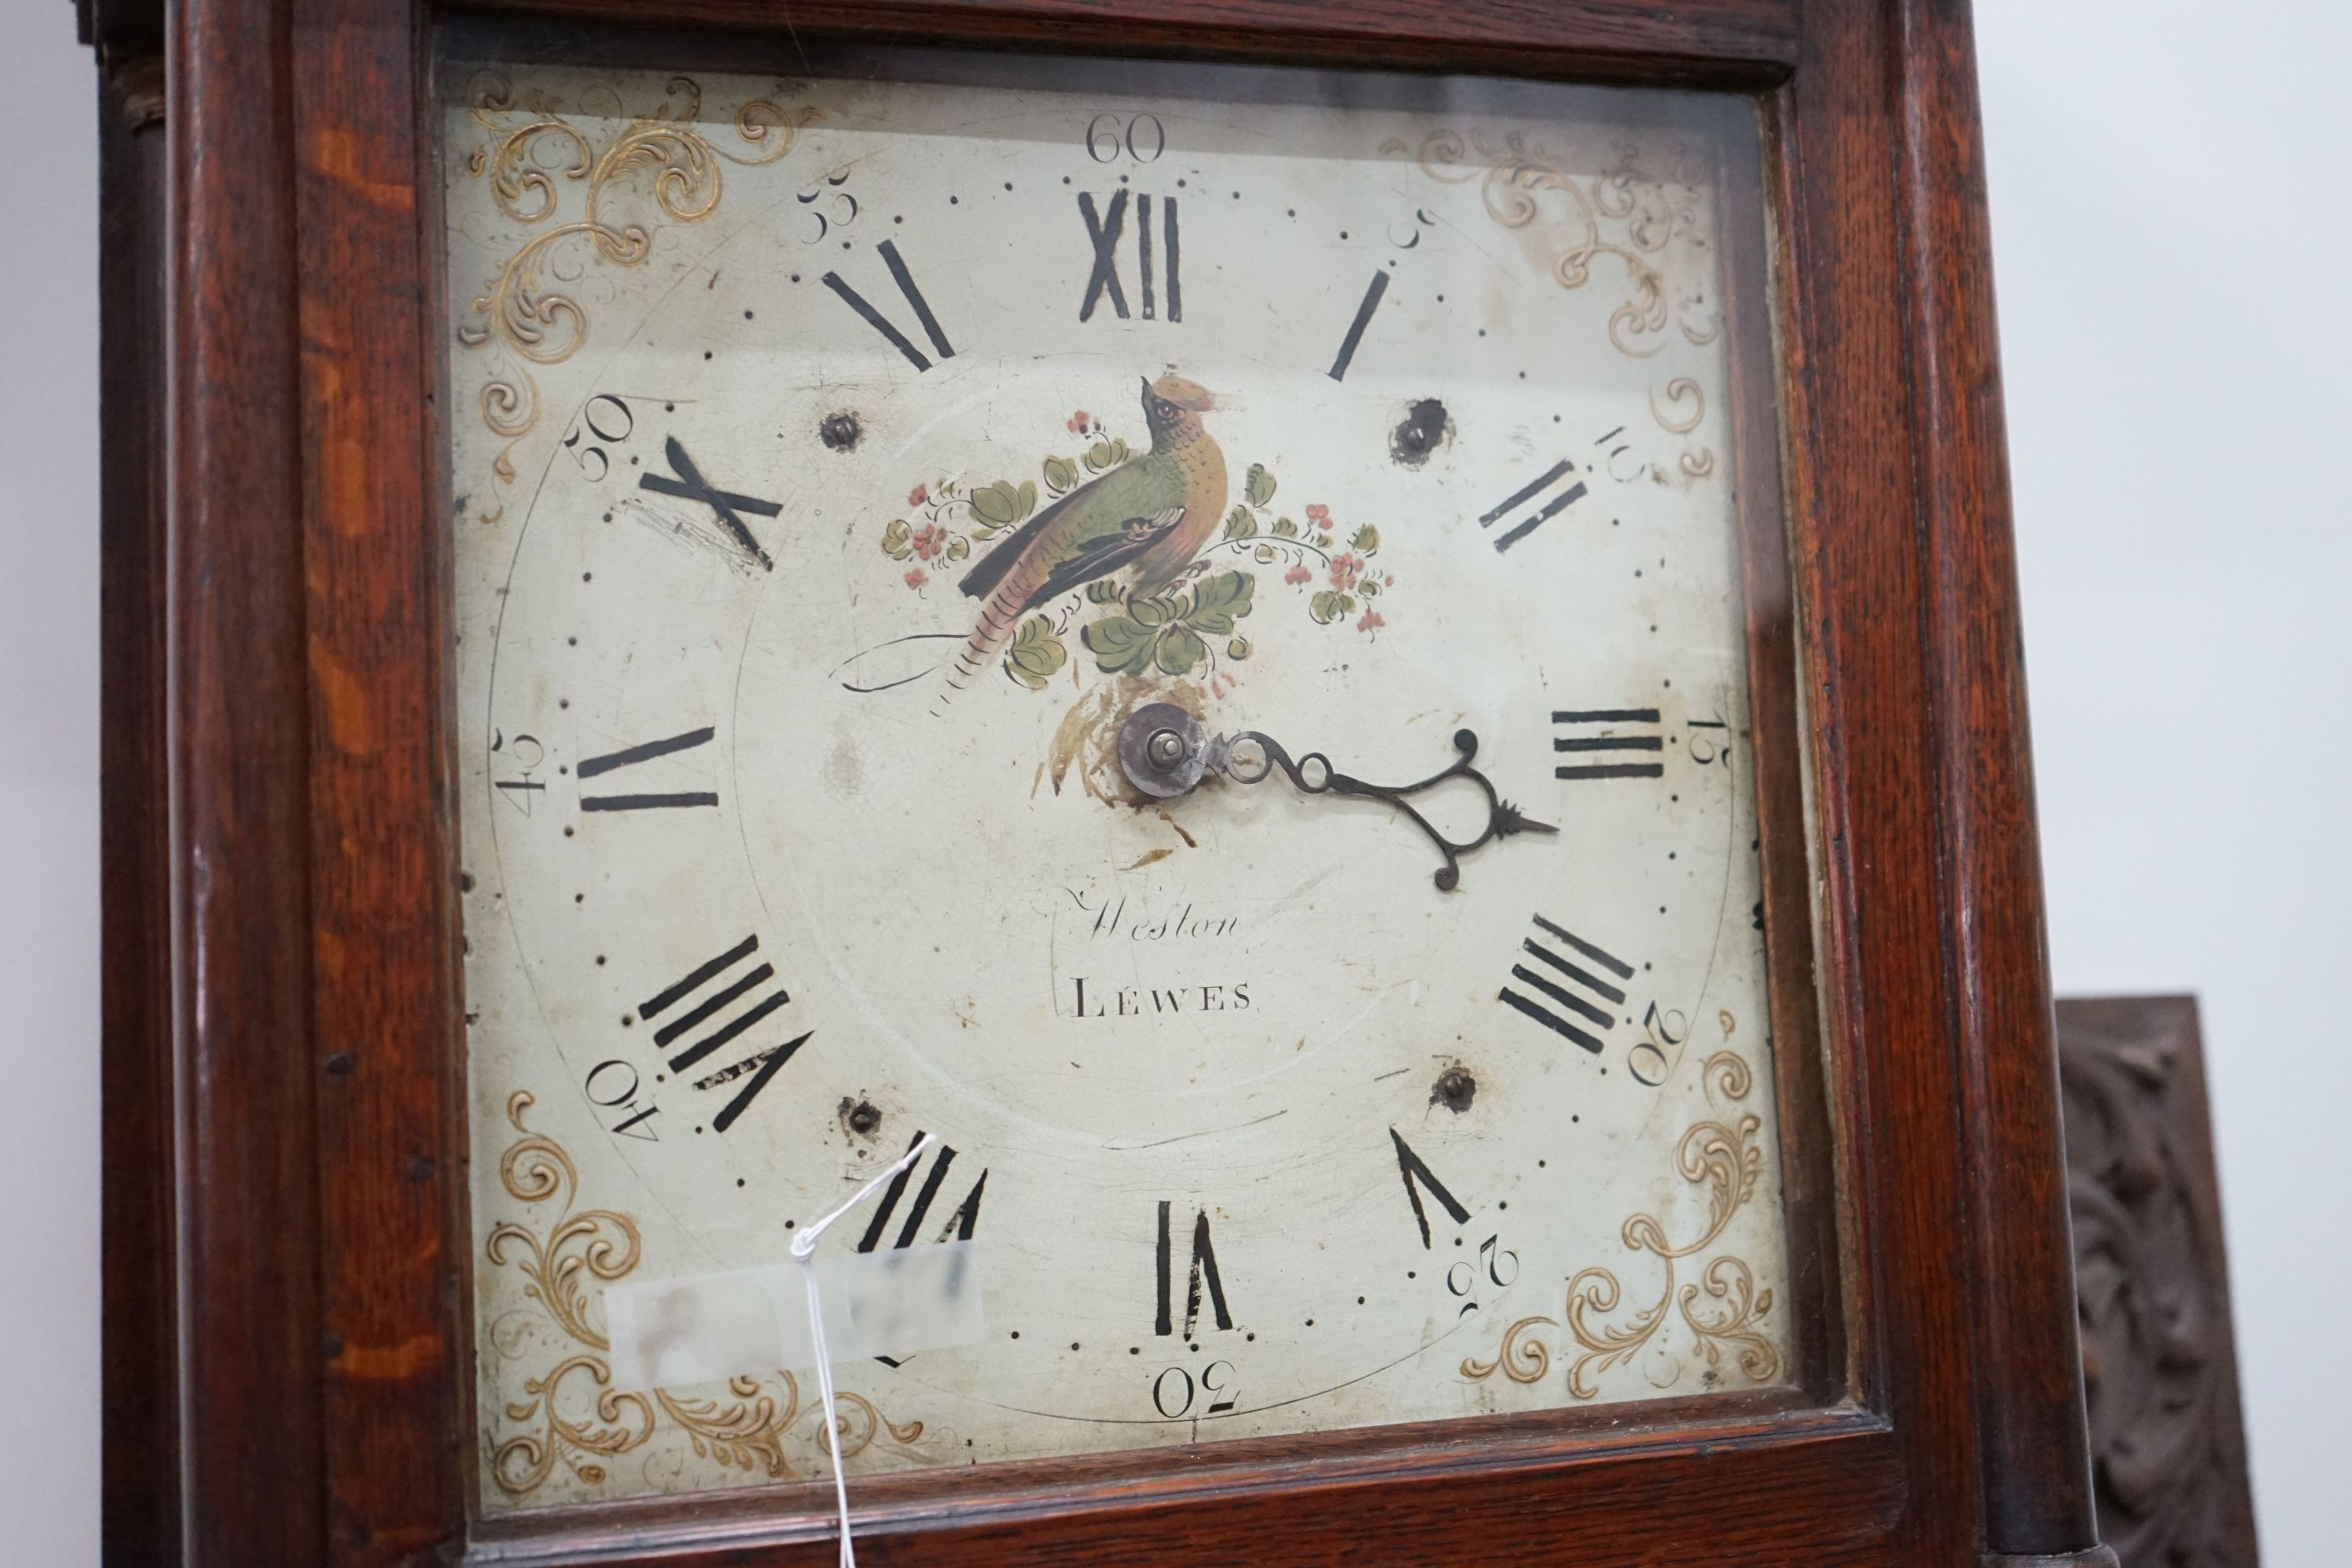 An early 19th century oak 30-hour longcase clock marked Weston, Lewes, height 199cm - Image 2 of 4